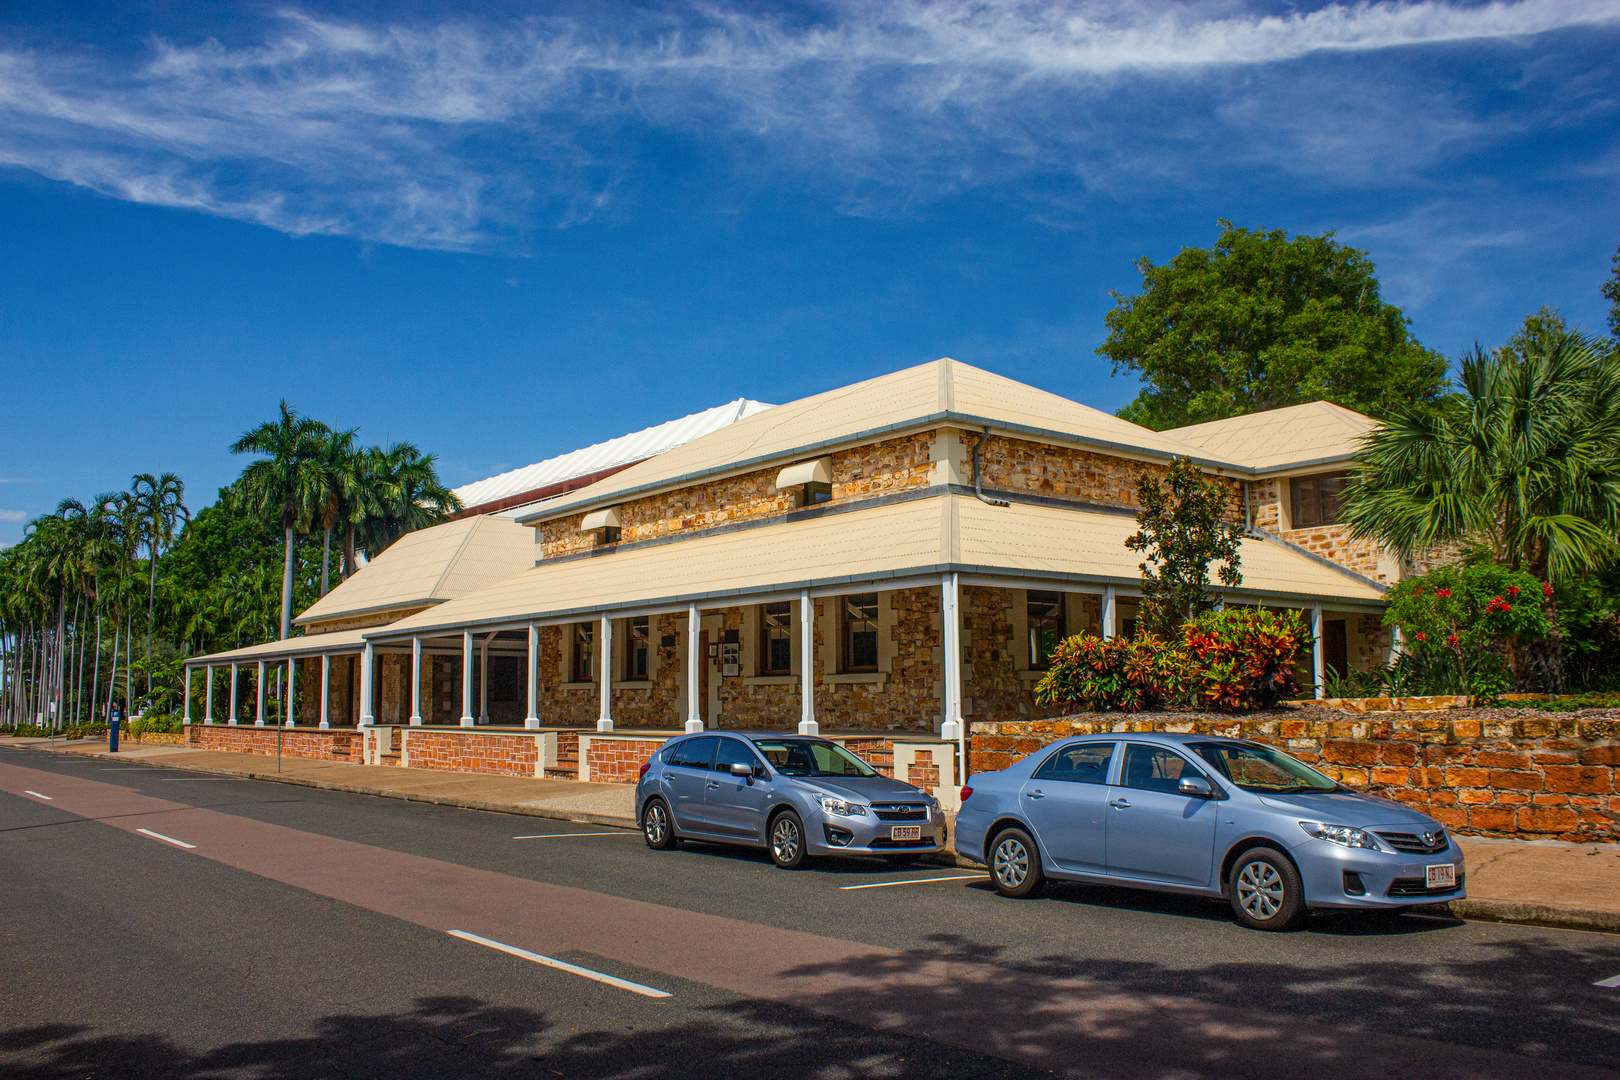 Office of the Administrator, Darwin